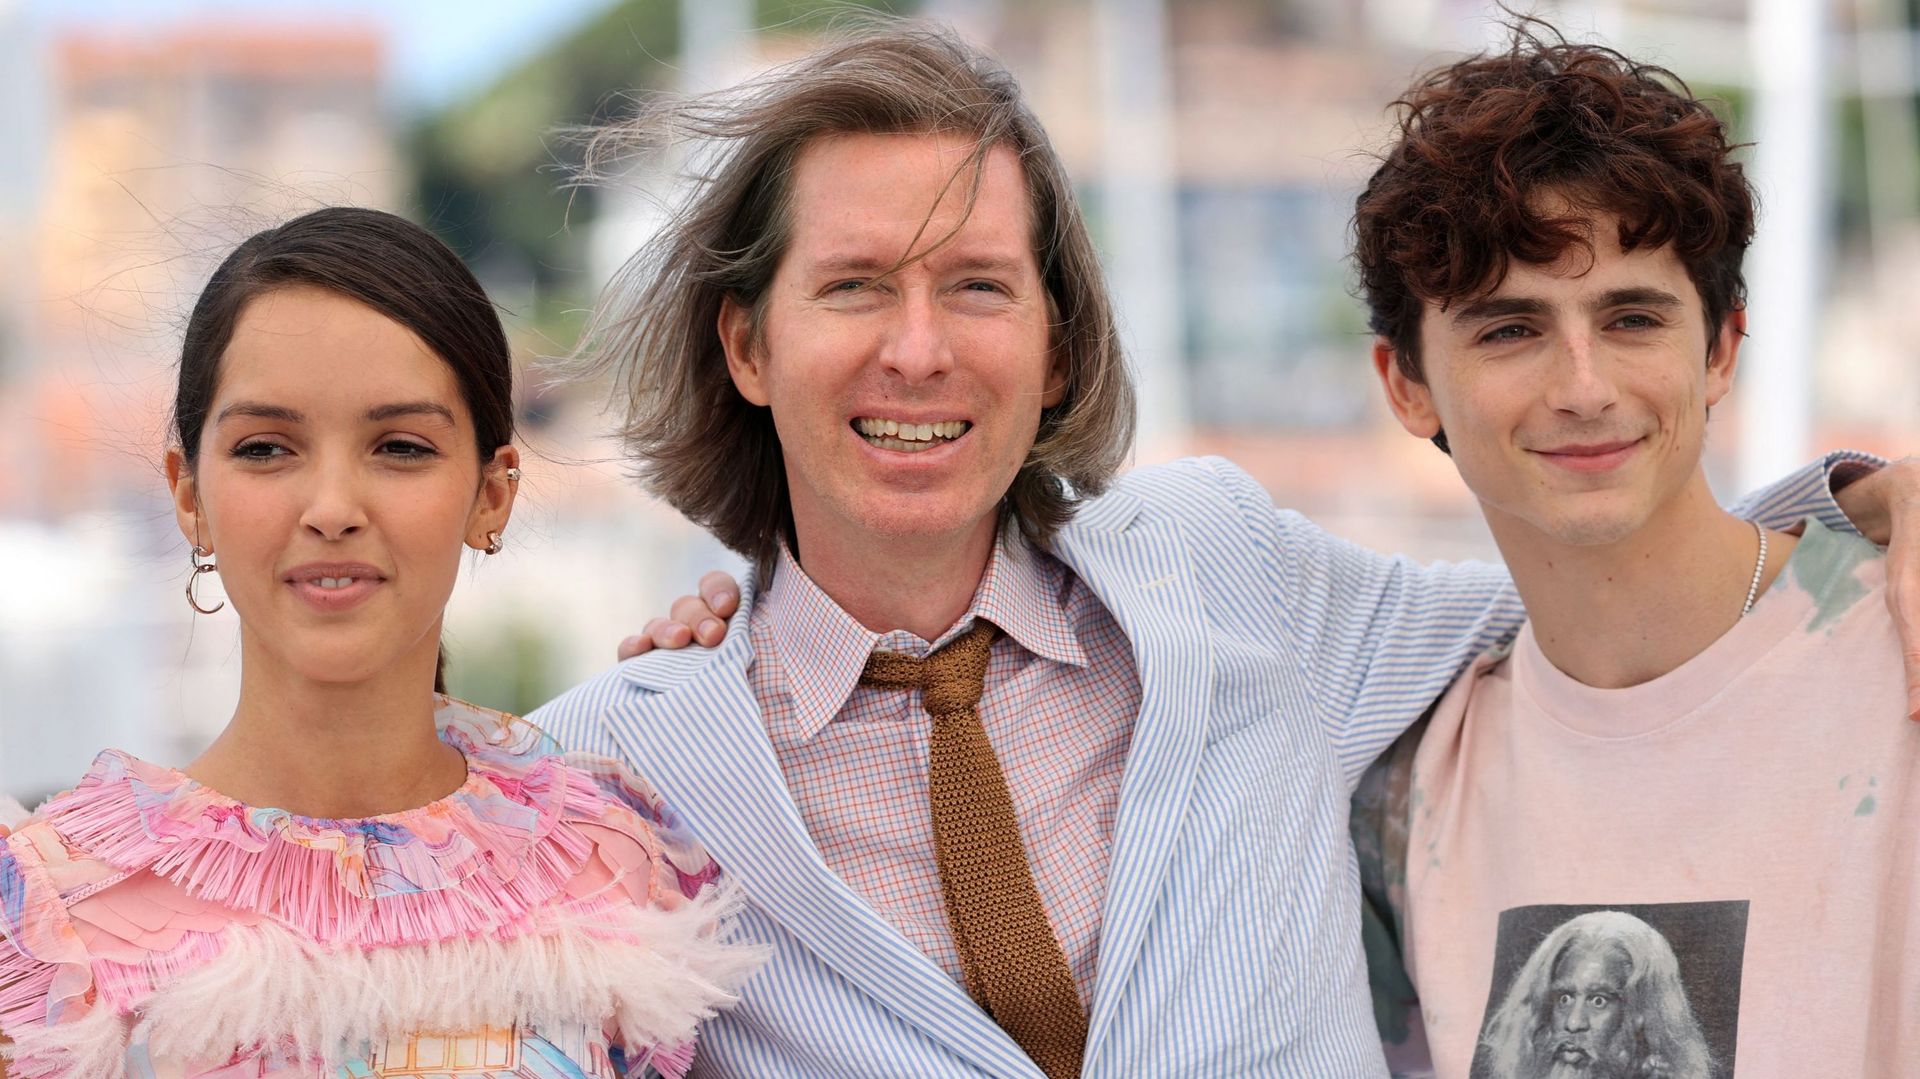 Lyna Khoudry, Wes Anderson et Timothee Chalamet